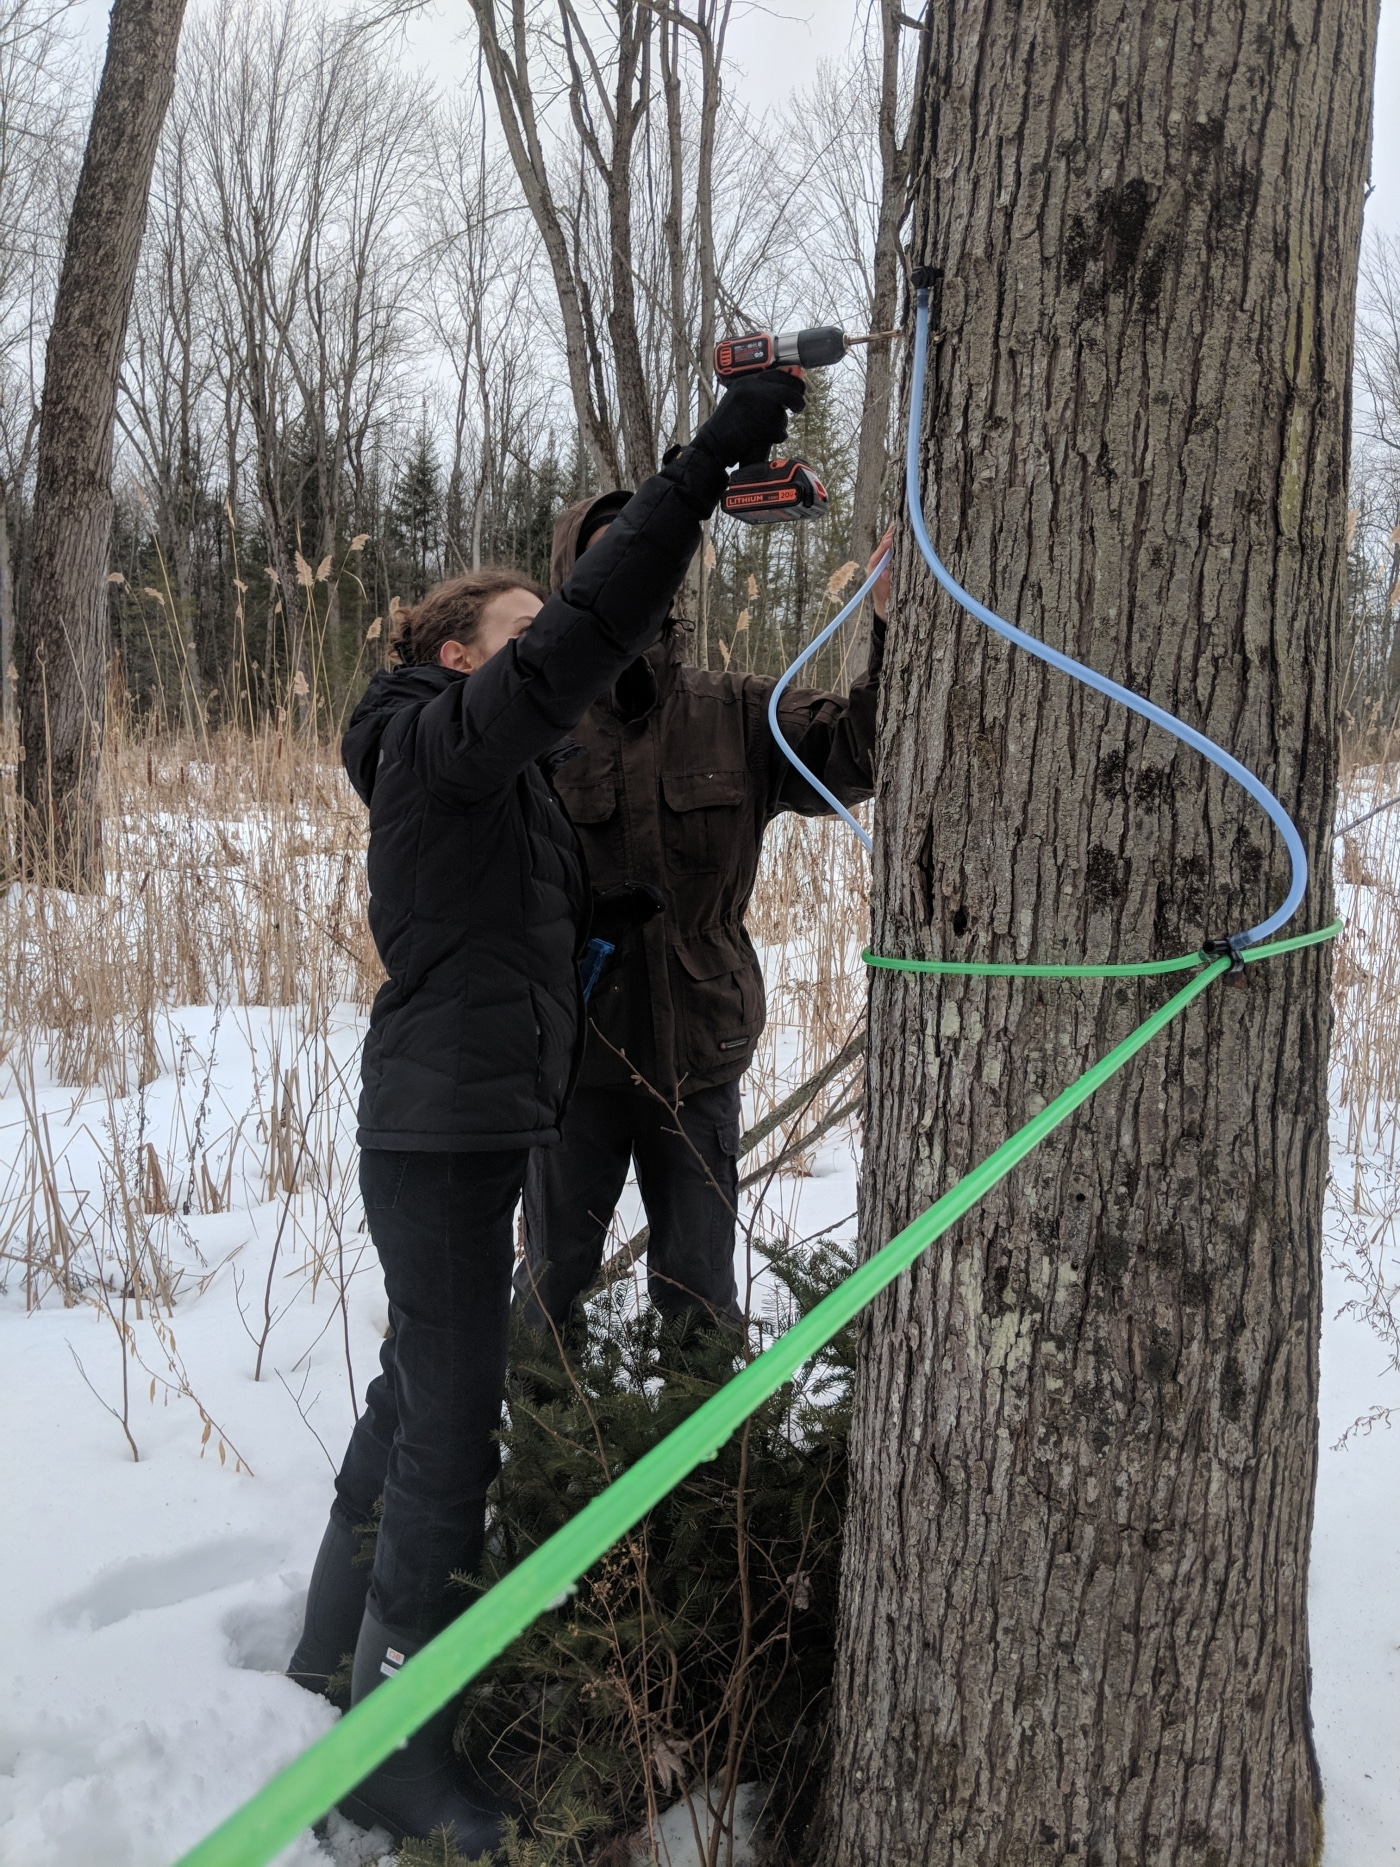 Man’s DIY Maple Tree Tapping System Collects 100 Gallons of Sap